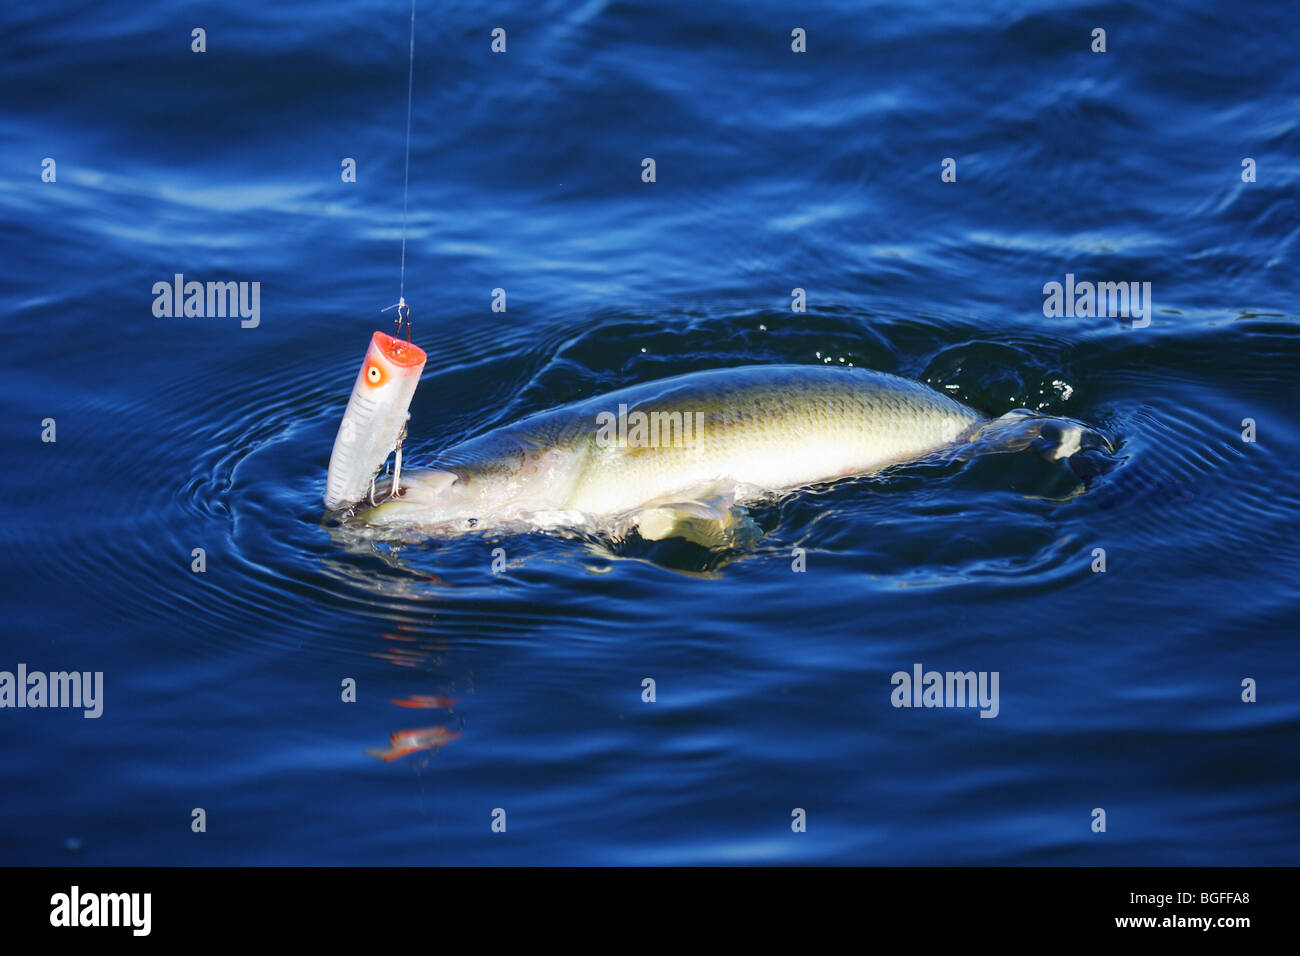 Large mouth bass with Heddon Chugger Spook lure in mouth being landed in water Stock Photo